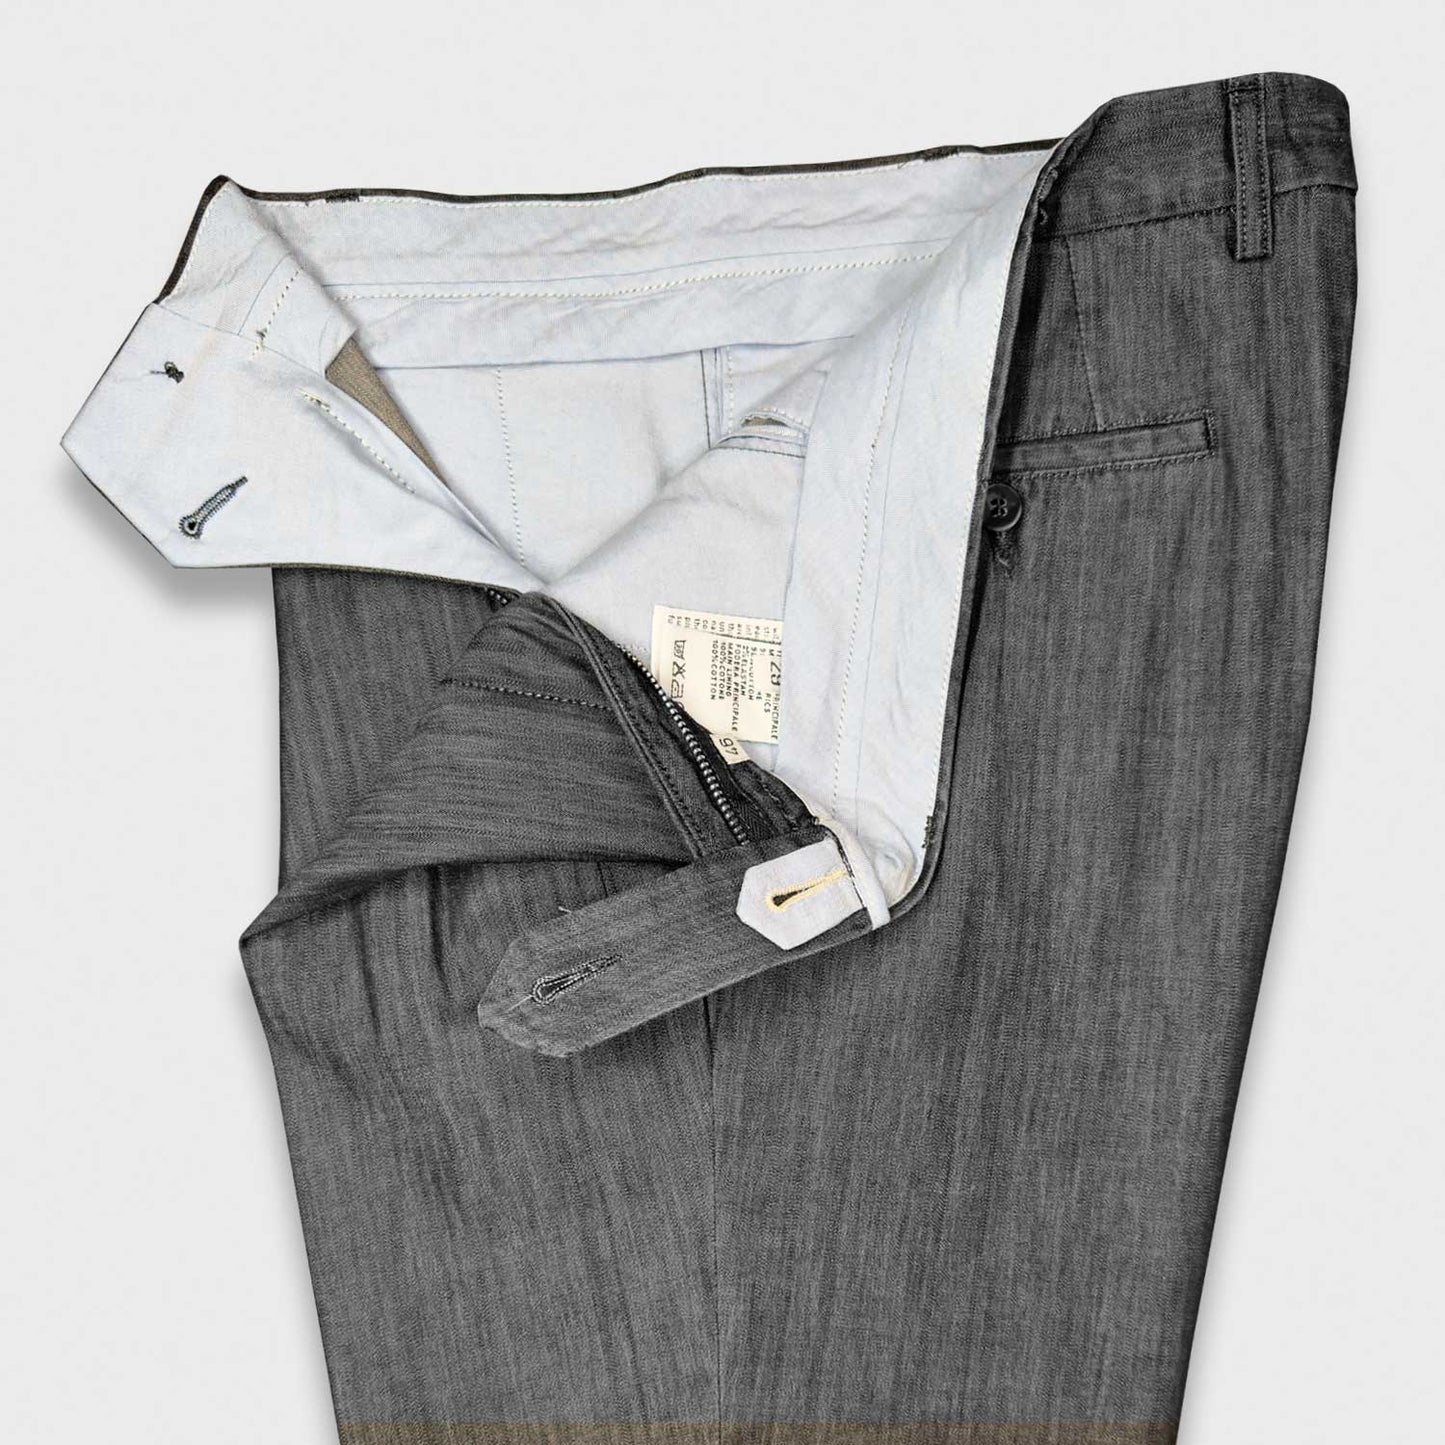 Load image into Gallery viewer, Black Tailored Trousers Kurabo Jeans Double Pleats. Men&amp;#39;s pants with a classic cut made with a sporty fabric. Tailored jeans trousers Rotasport by Rota pantaloni, handmade in Italy with a soft and refined Japanese Kurabo denim fabric, flamed black color, double pleats, button and zip closure.
